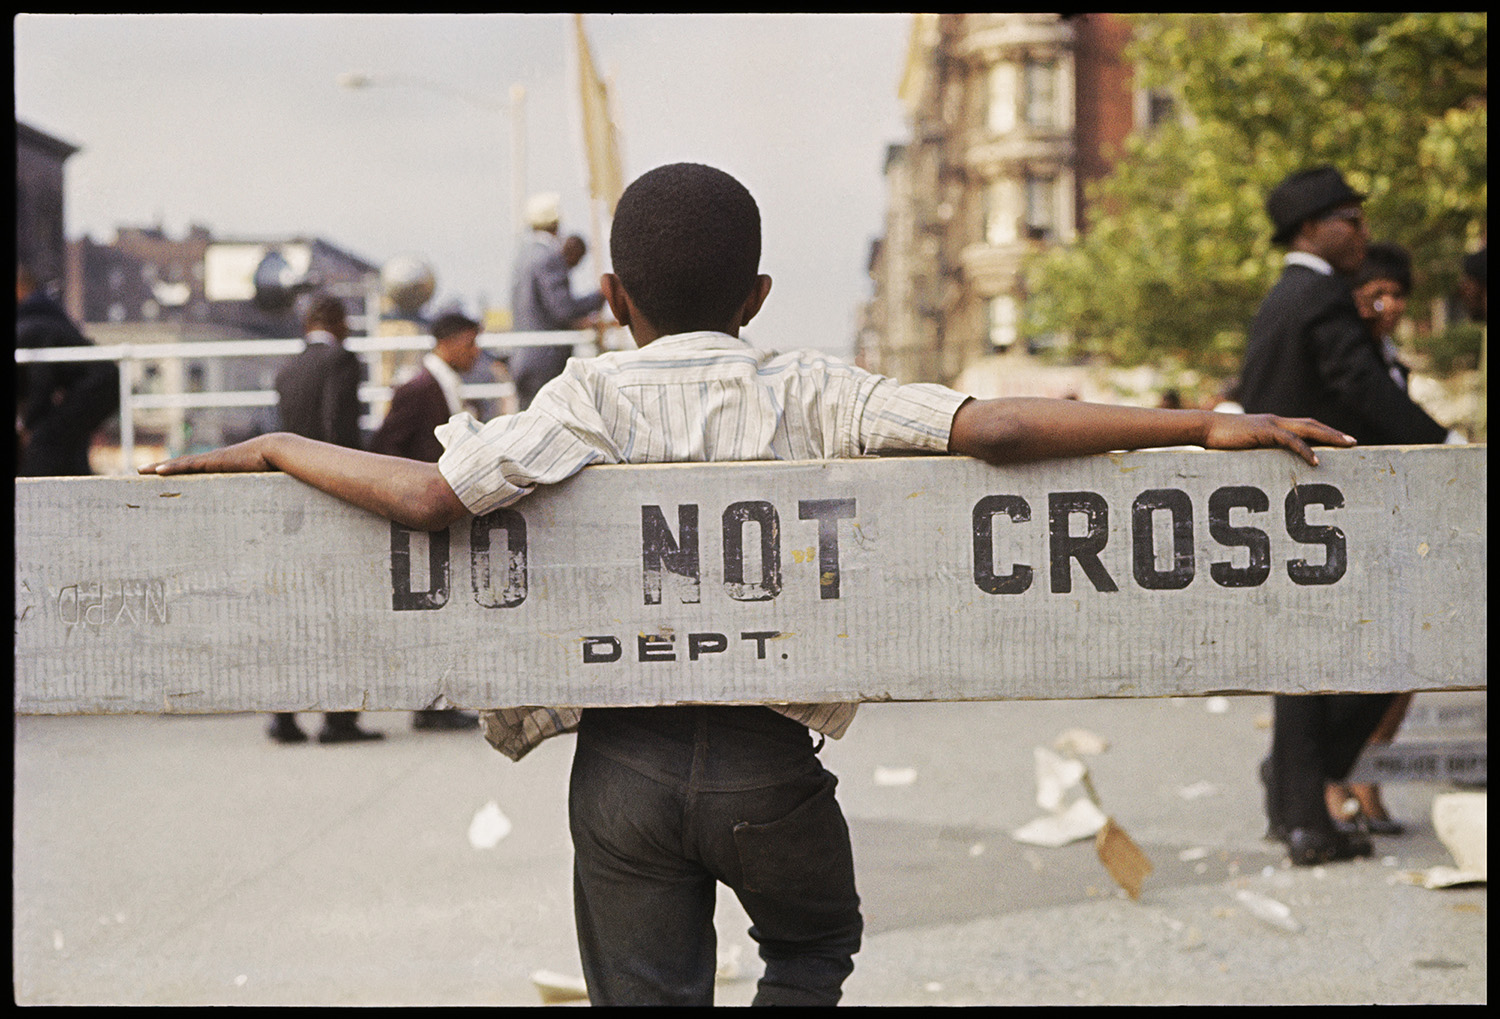 Color photograph of back of Black boy leaning against a barricade that reads "DO NOT CROSS"